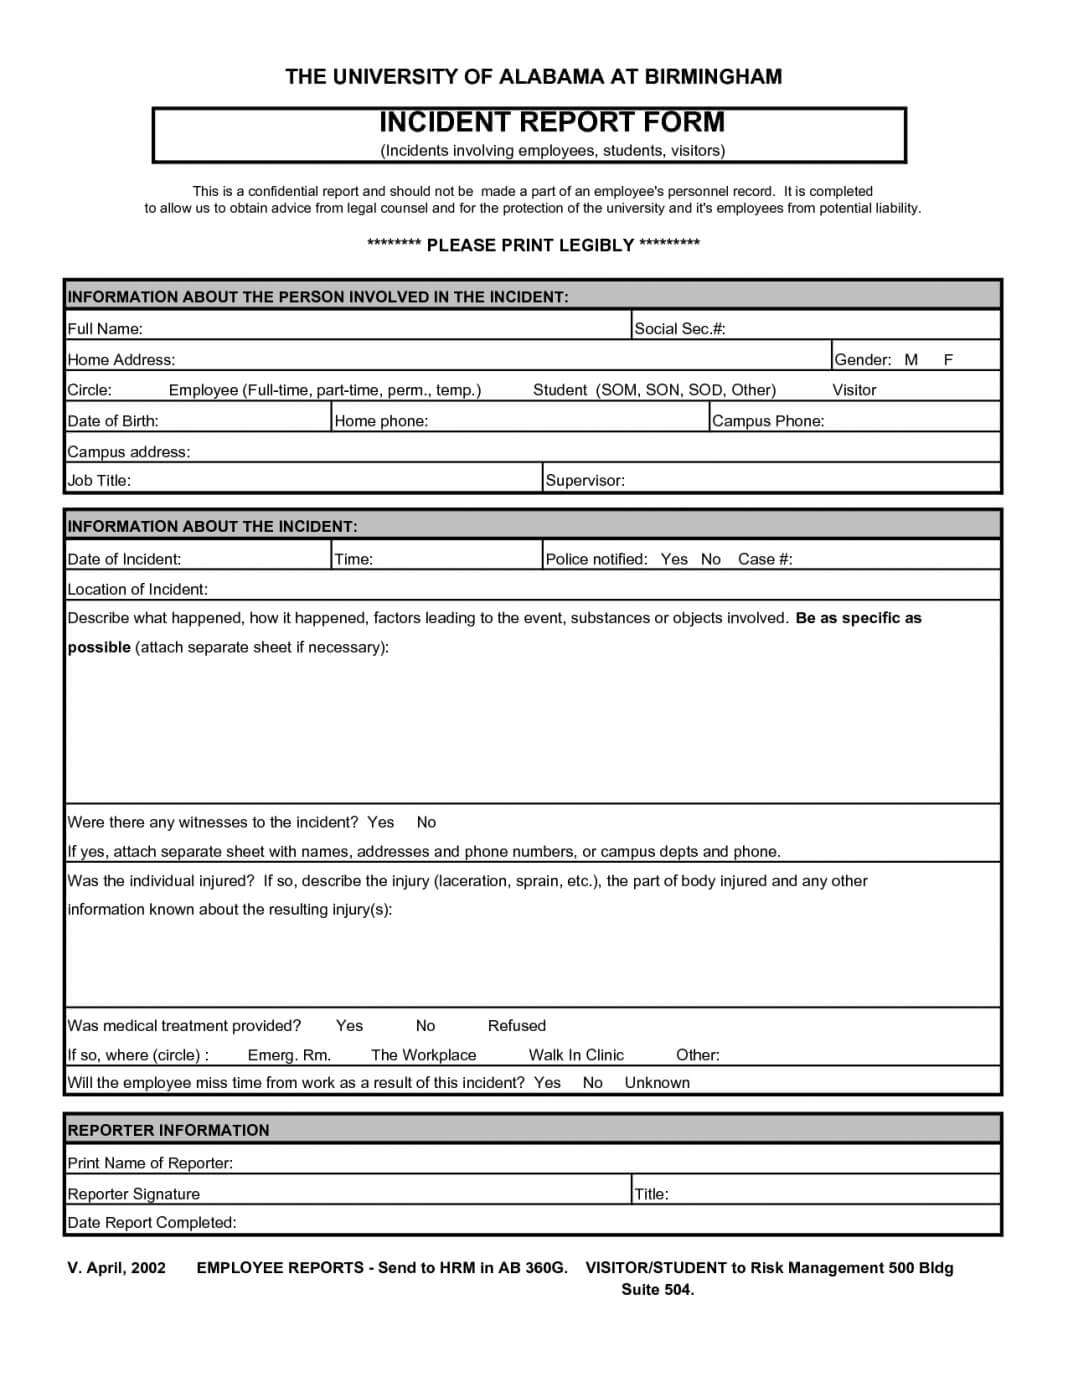 Incident Report Template Sample Forms Instinctual In Incident Report Form Template Qld